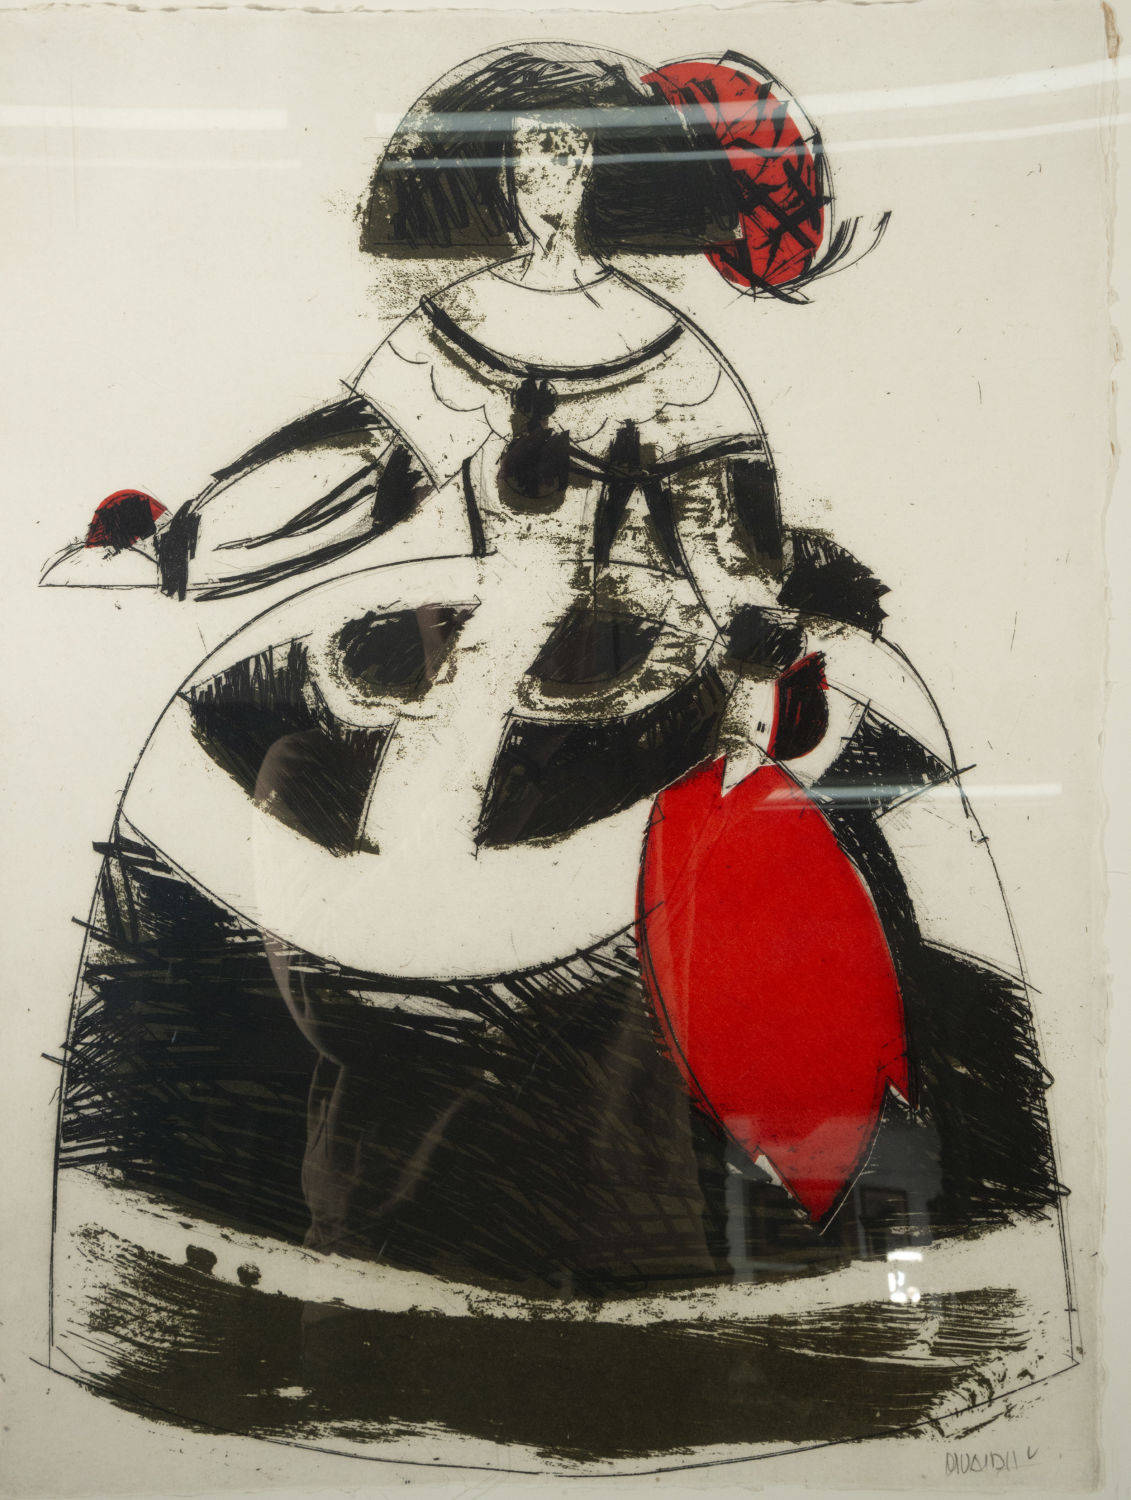 Manolo Valdés - "Portfolio Meninas V" etching and collage on paper - Image 2 of 4